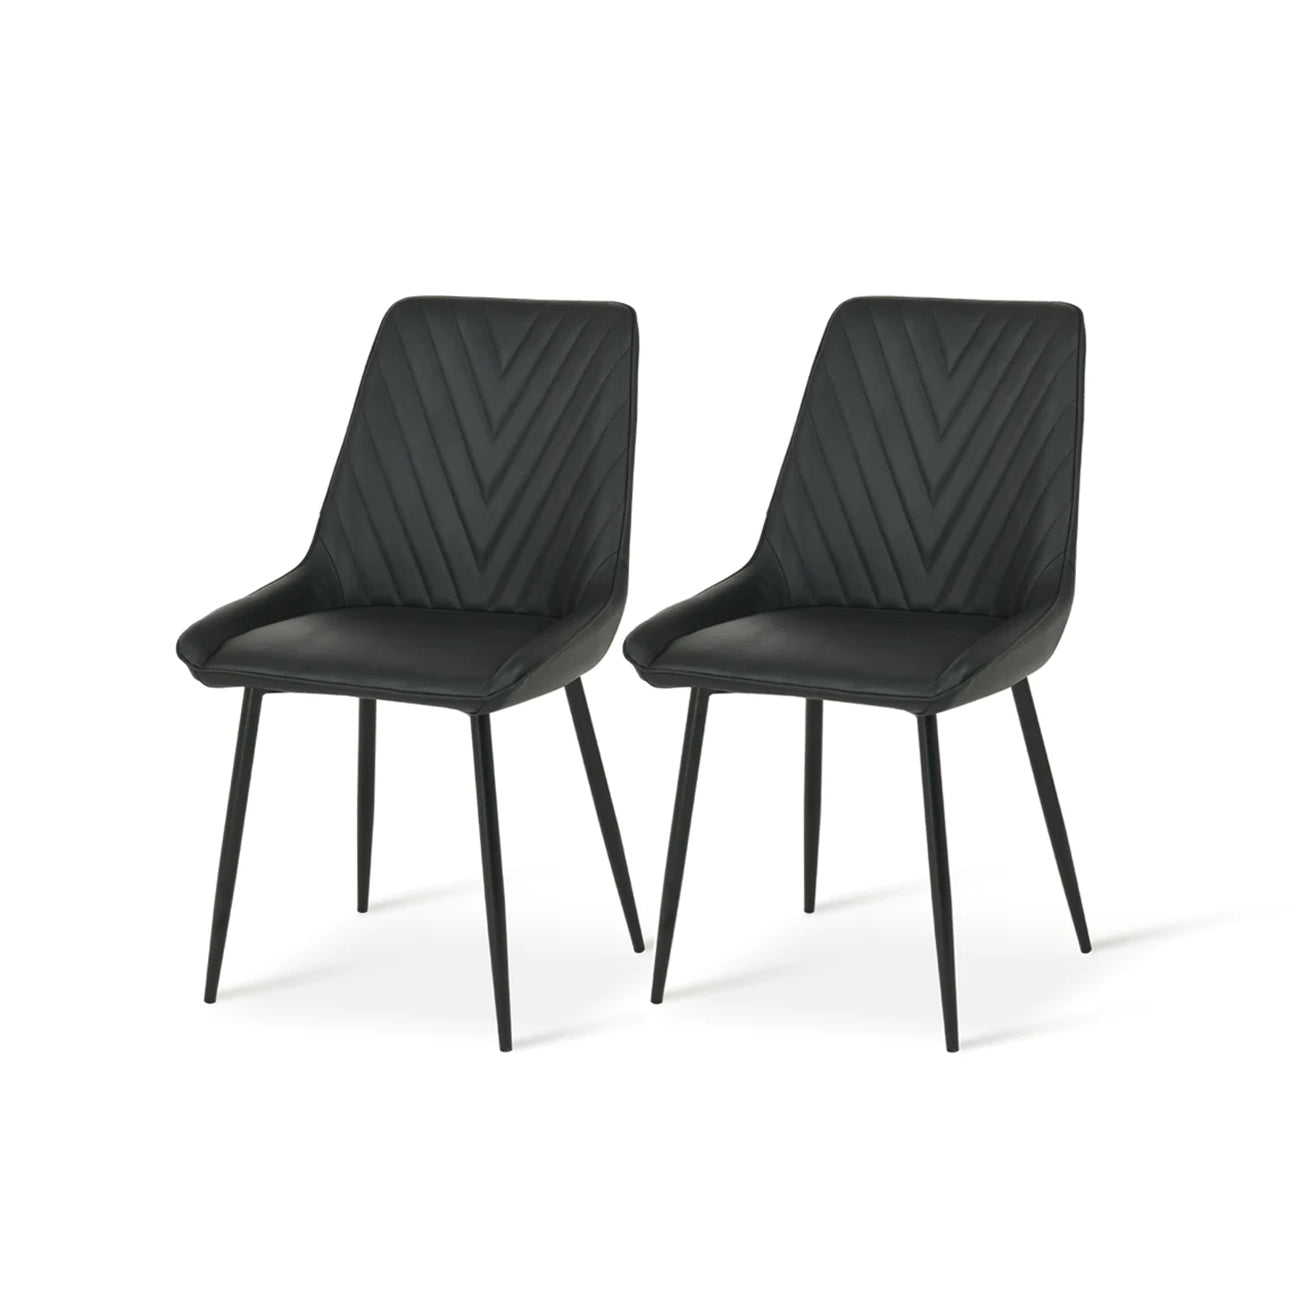 Zack V Dining Chairs [Set of 2] [Pu Leather]